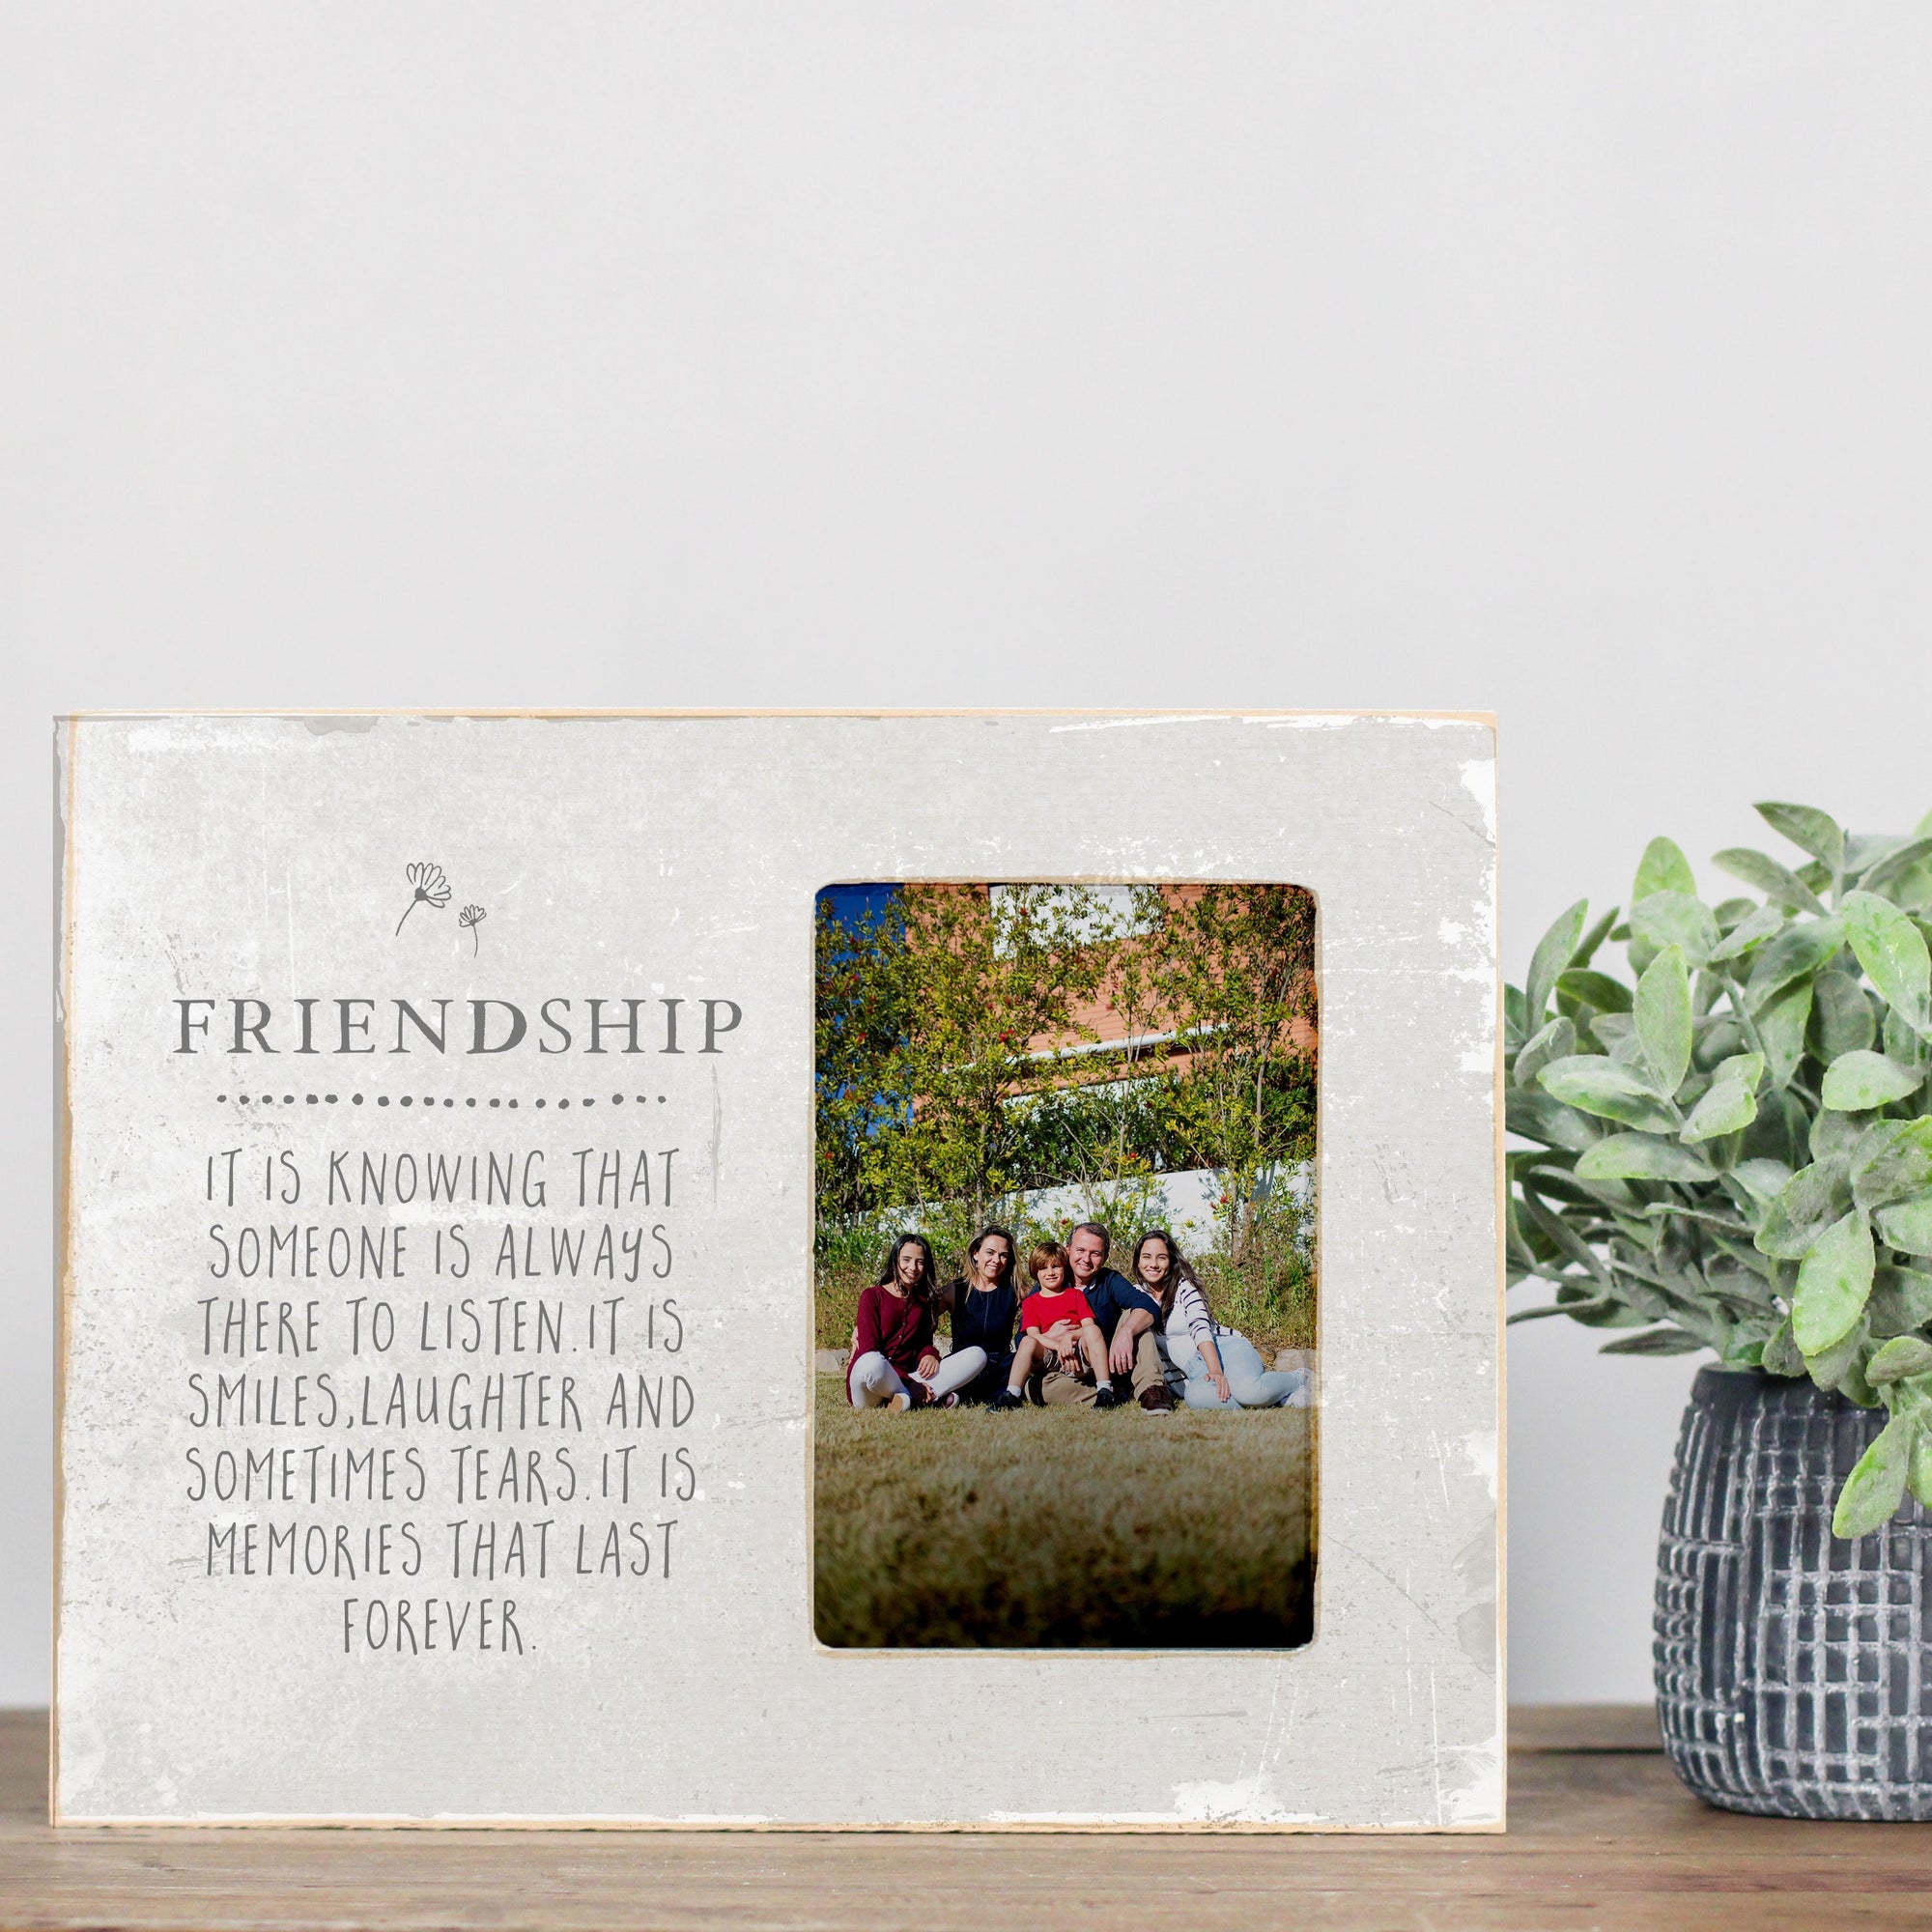 Front View. Picture Frame | Friendship Photo Frame Picture Frames The WAREHOUSE Studio 